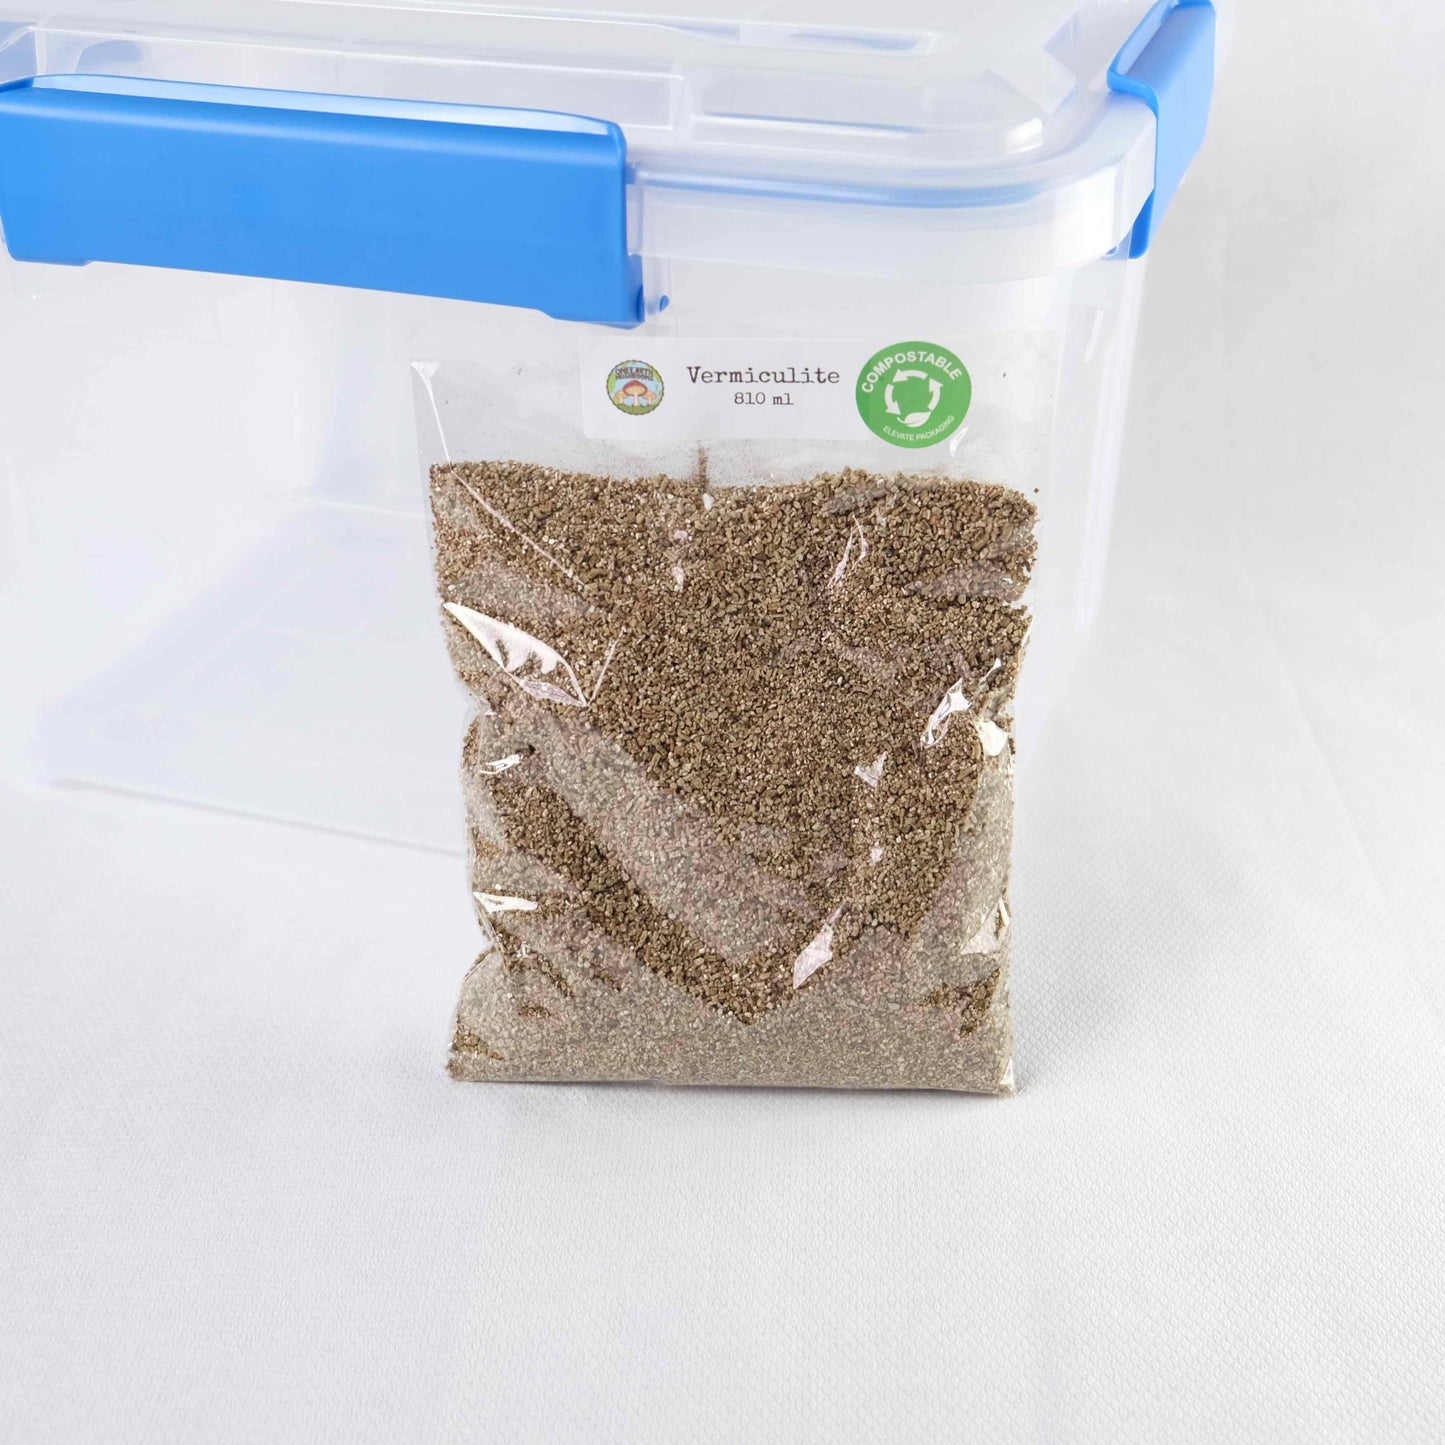 810 ml of natural vermiculite. This helps maintain moisture in the mushroom substrate. This bag is contains enough vermiculite to complete one grow cycle in your monotub. 